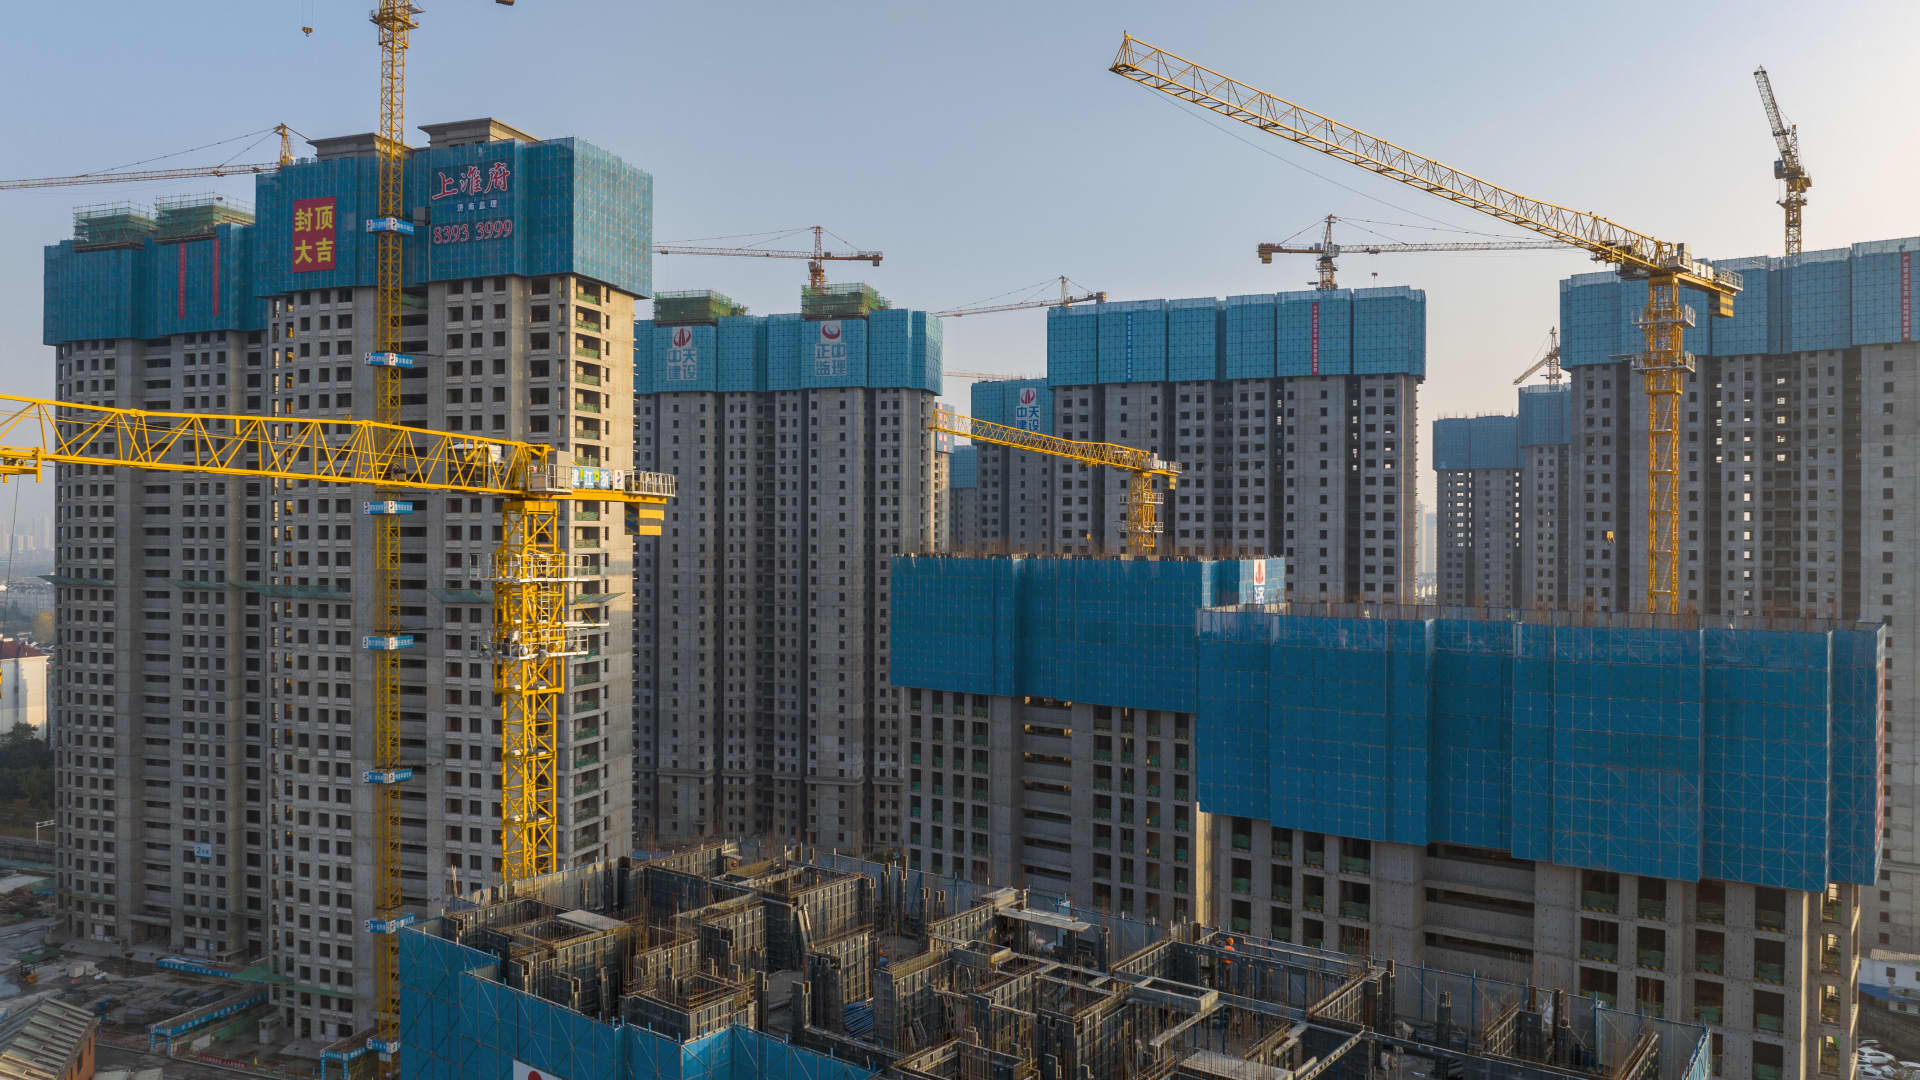 Chinese real estate stocks surged this month. But analyst warns of high expectations vs. ‘weak reality’